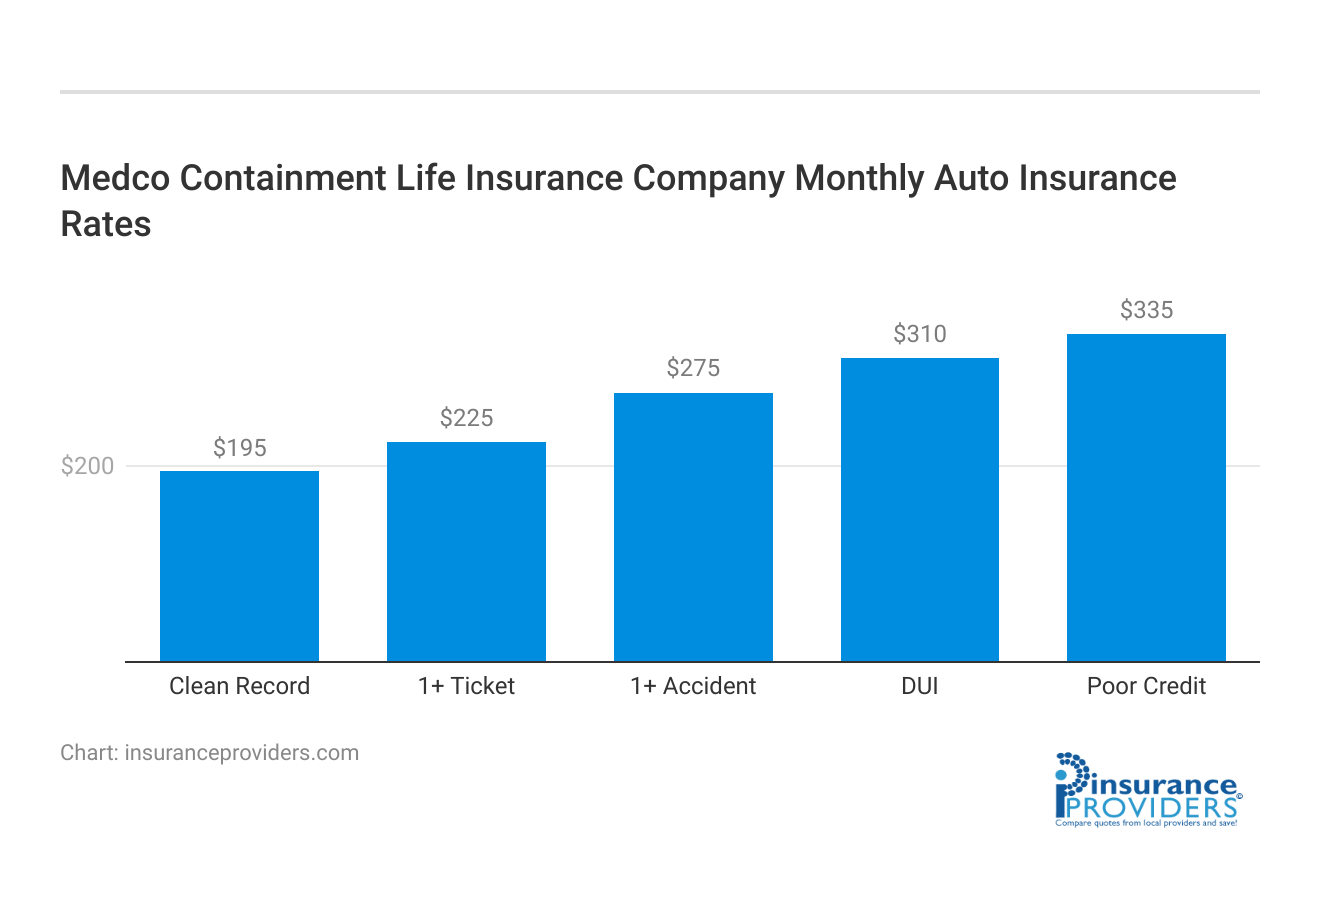 <h3>Medco Containment Life Insurance Company Monthly Auto Insurance Rates</h3>